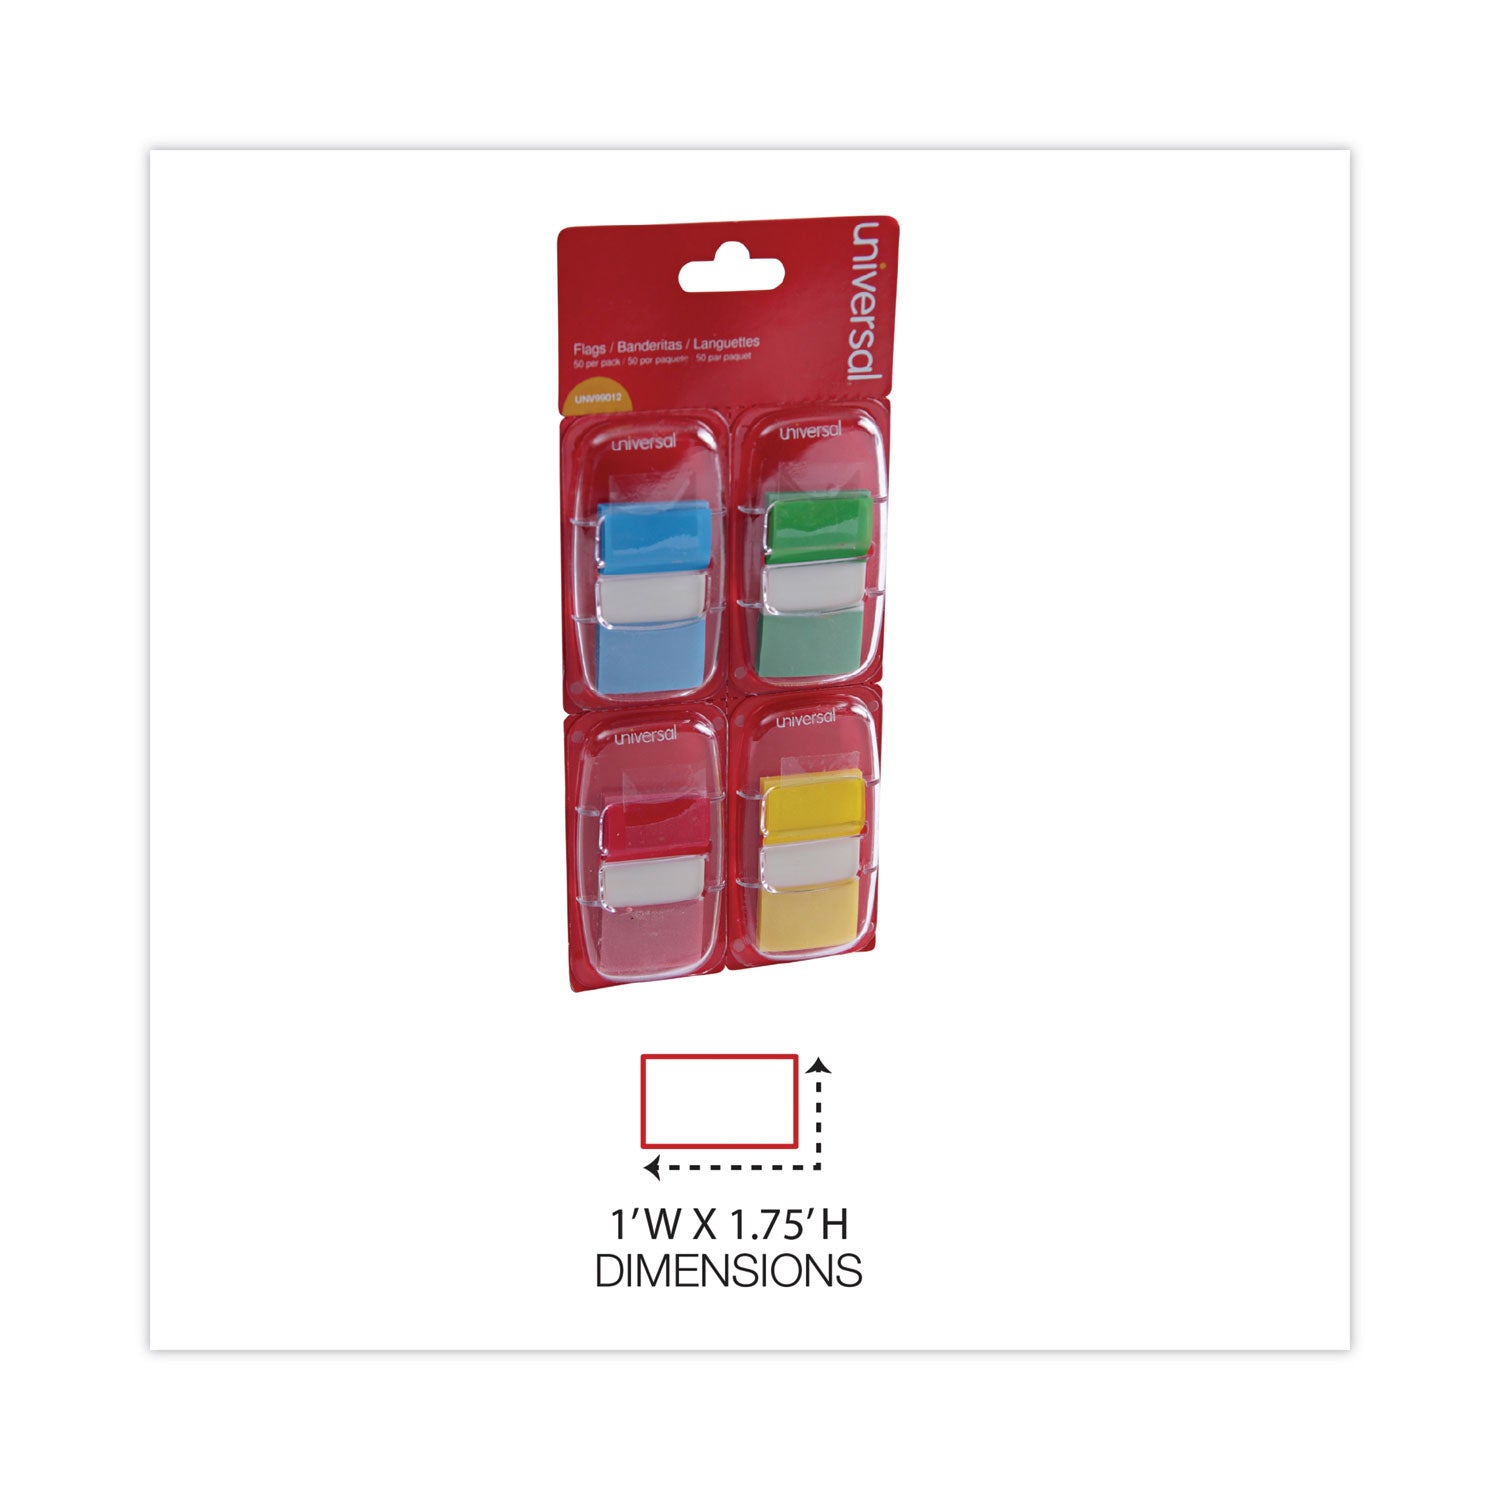 deluxe-pop-up-page-flags-1-x-175-four-assorted-colors-50-flags-dispenser-4-dispensers-pack_unv99012 - 2